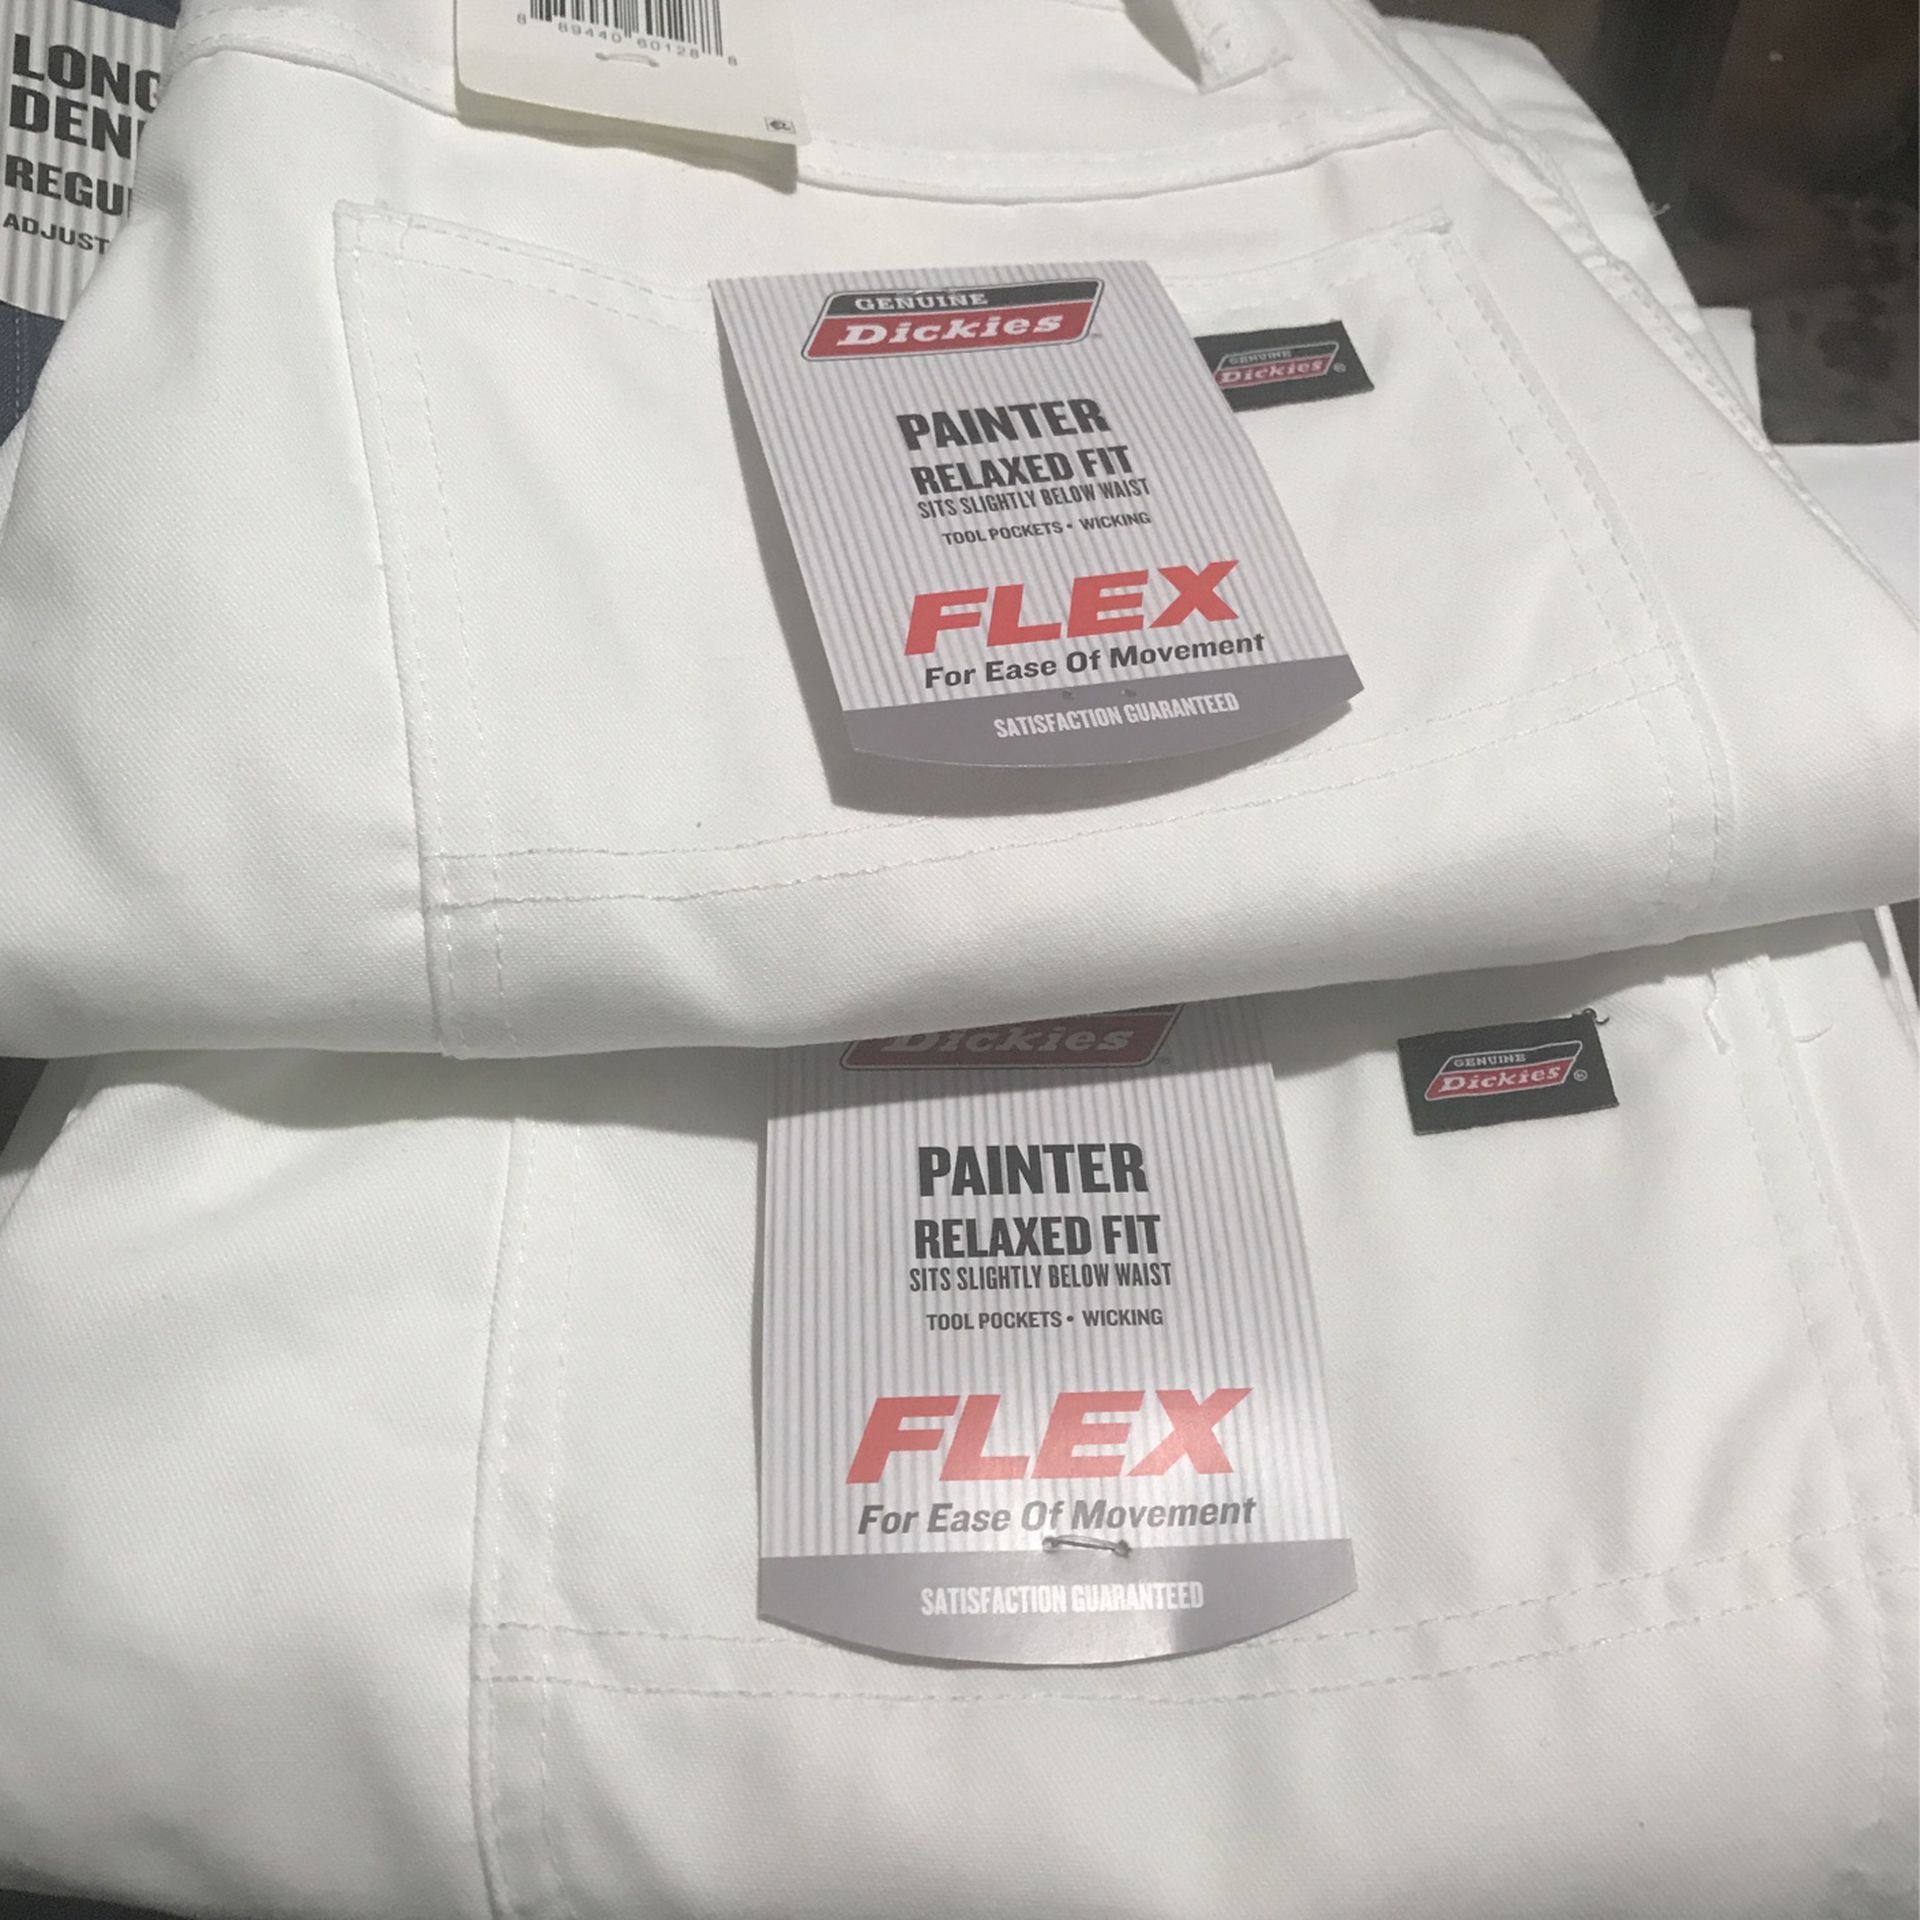 Two Dickies Painter Pans, Size 32X30 and  34X34